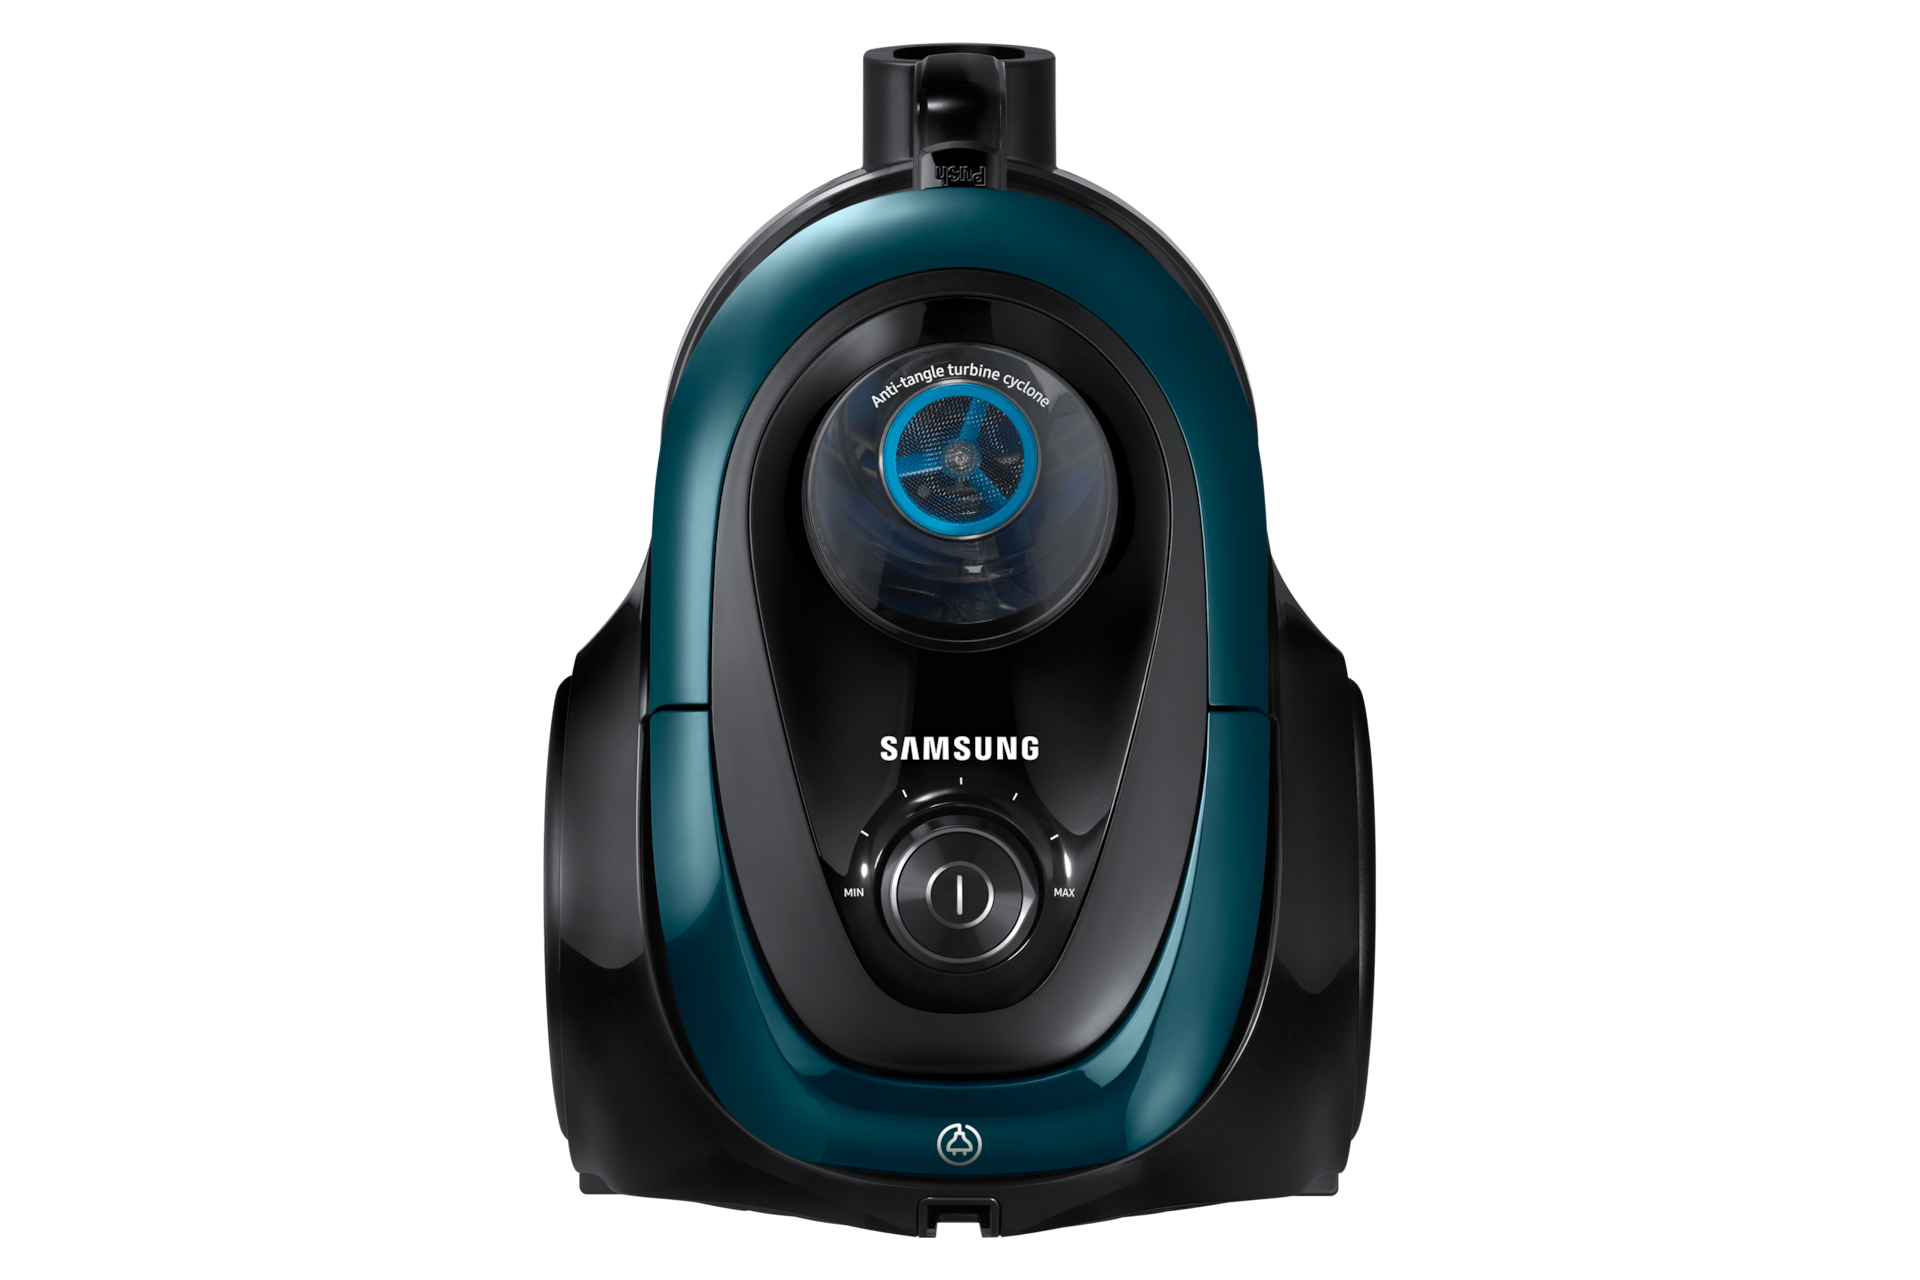 Front view of the Samsung Canister Vacuum Cleaner Max 360W (Urban Green) shows the compact body design.